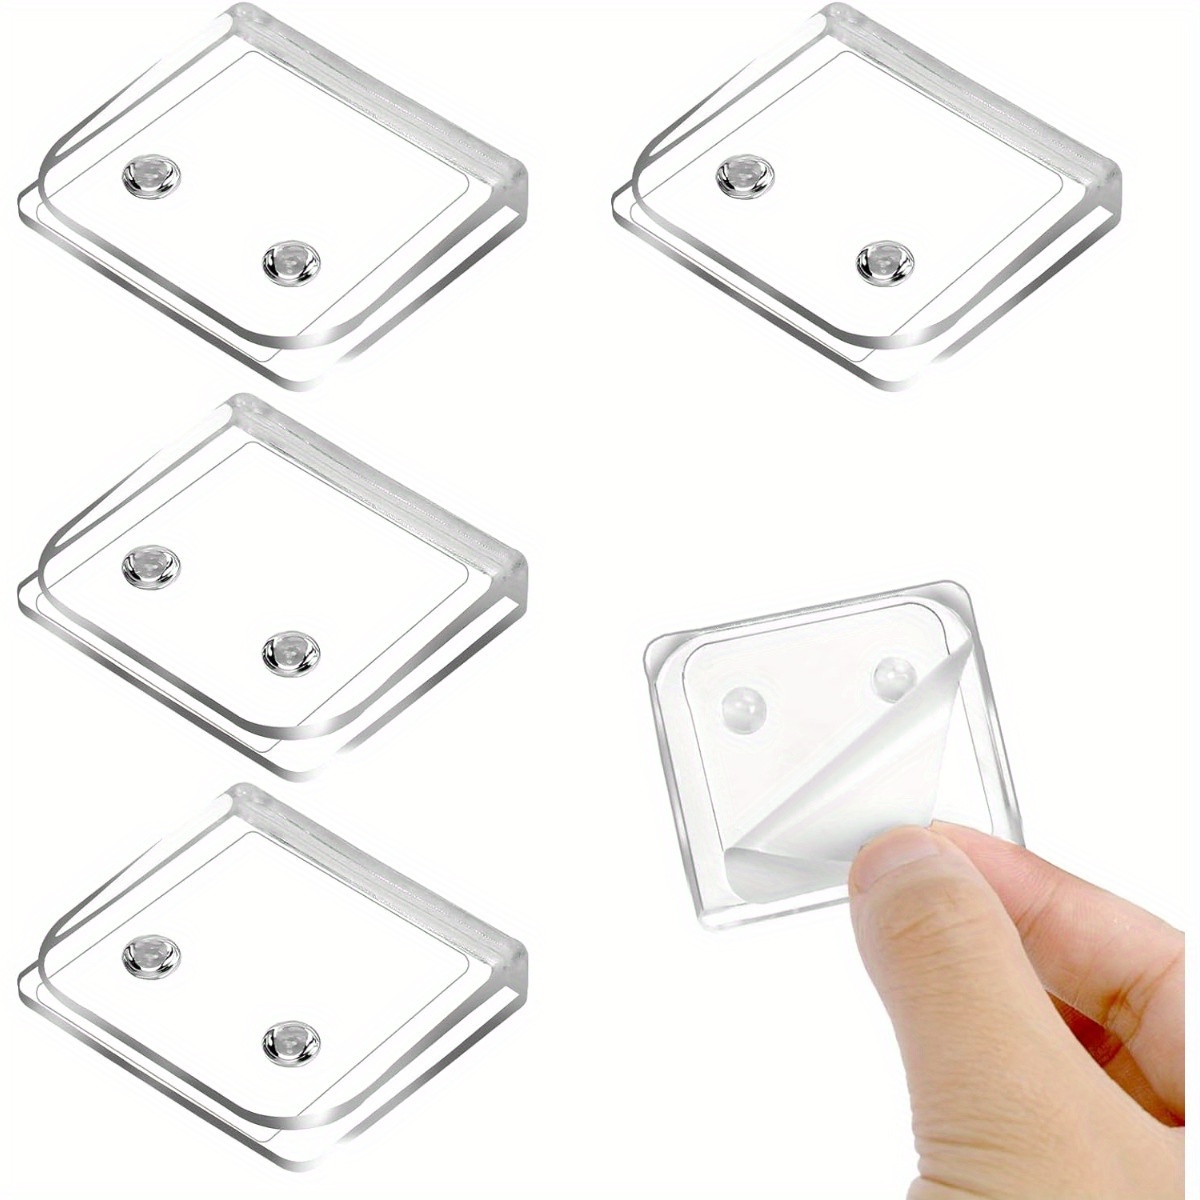 

4pcs Transparent Shower Curtain Clips, Plastic Self-adhesive Splash Guard Clips, Windproof Clear Liner Curtain Fasteners, Easy Installation